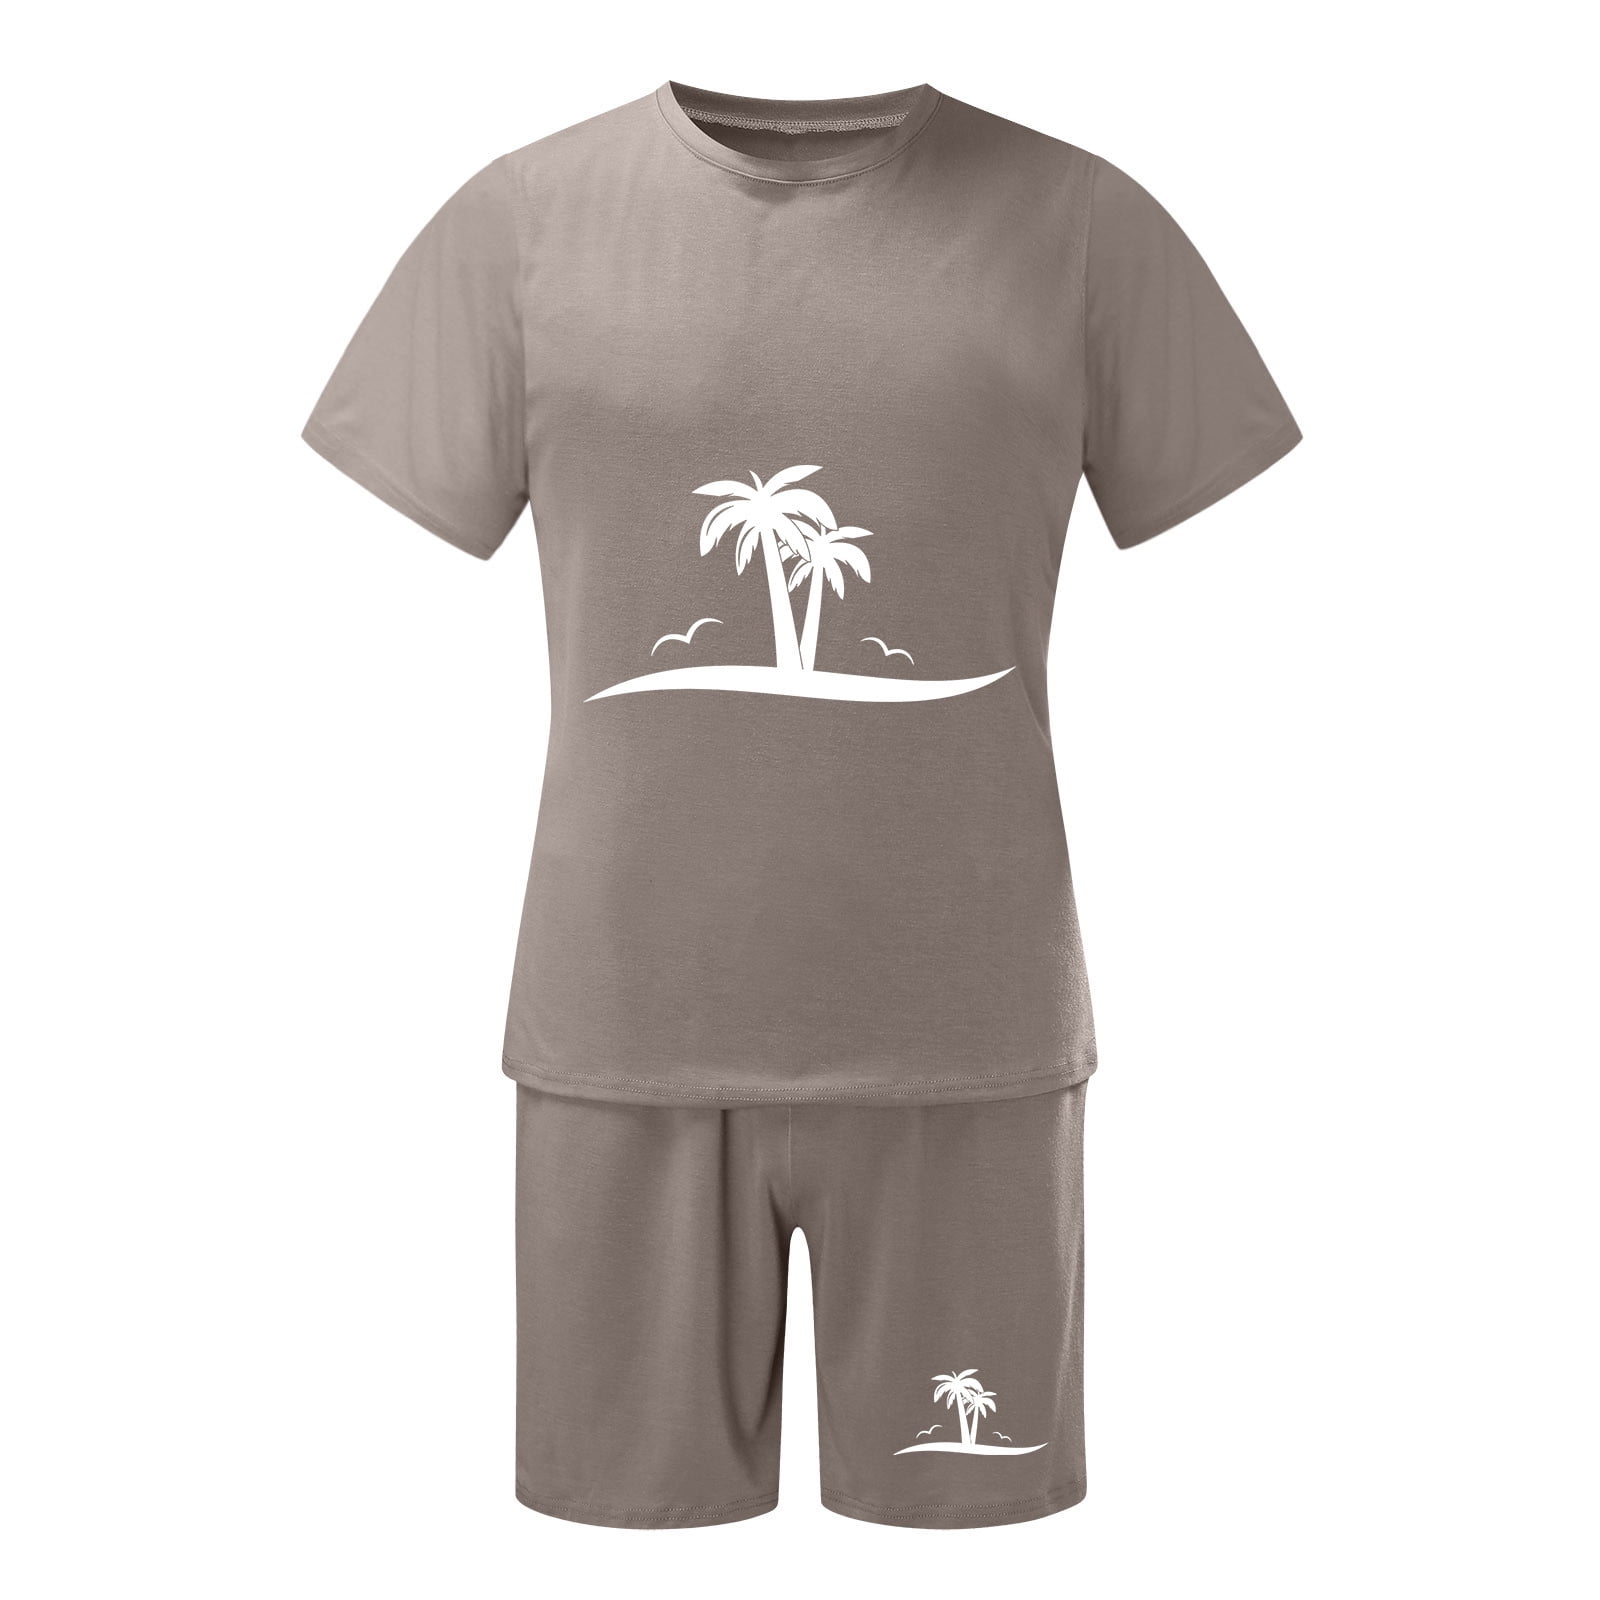 Grey Jackets For Men Men Summer Outfit Beach Short Sleeve Printed